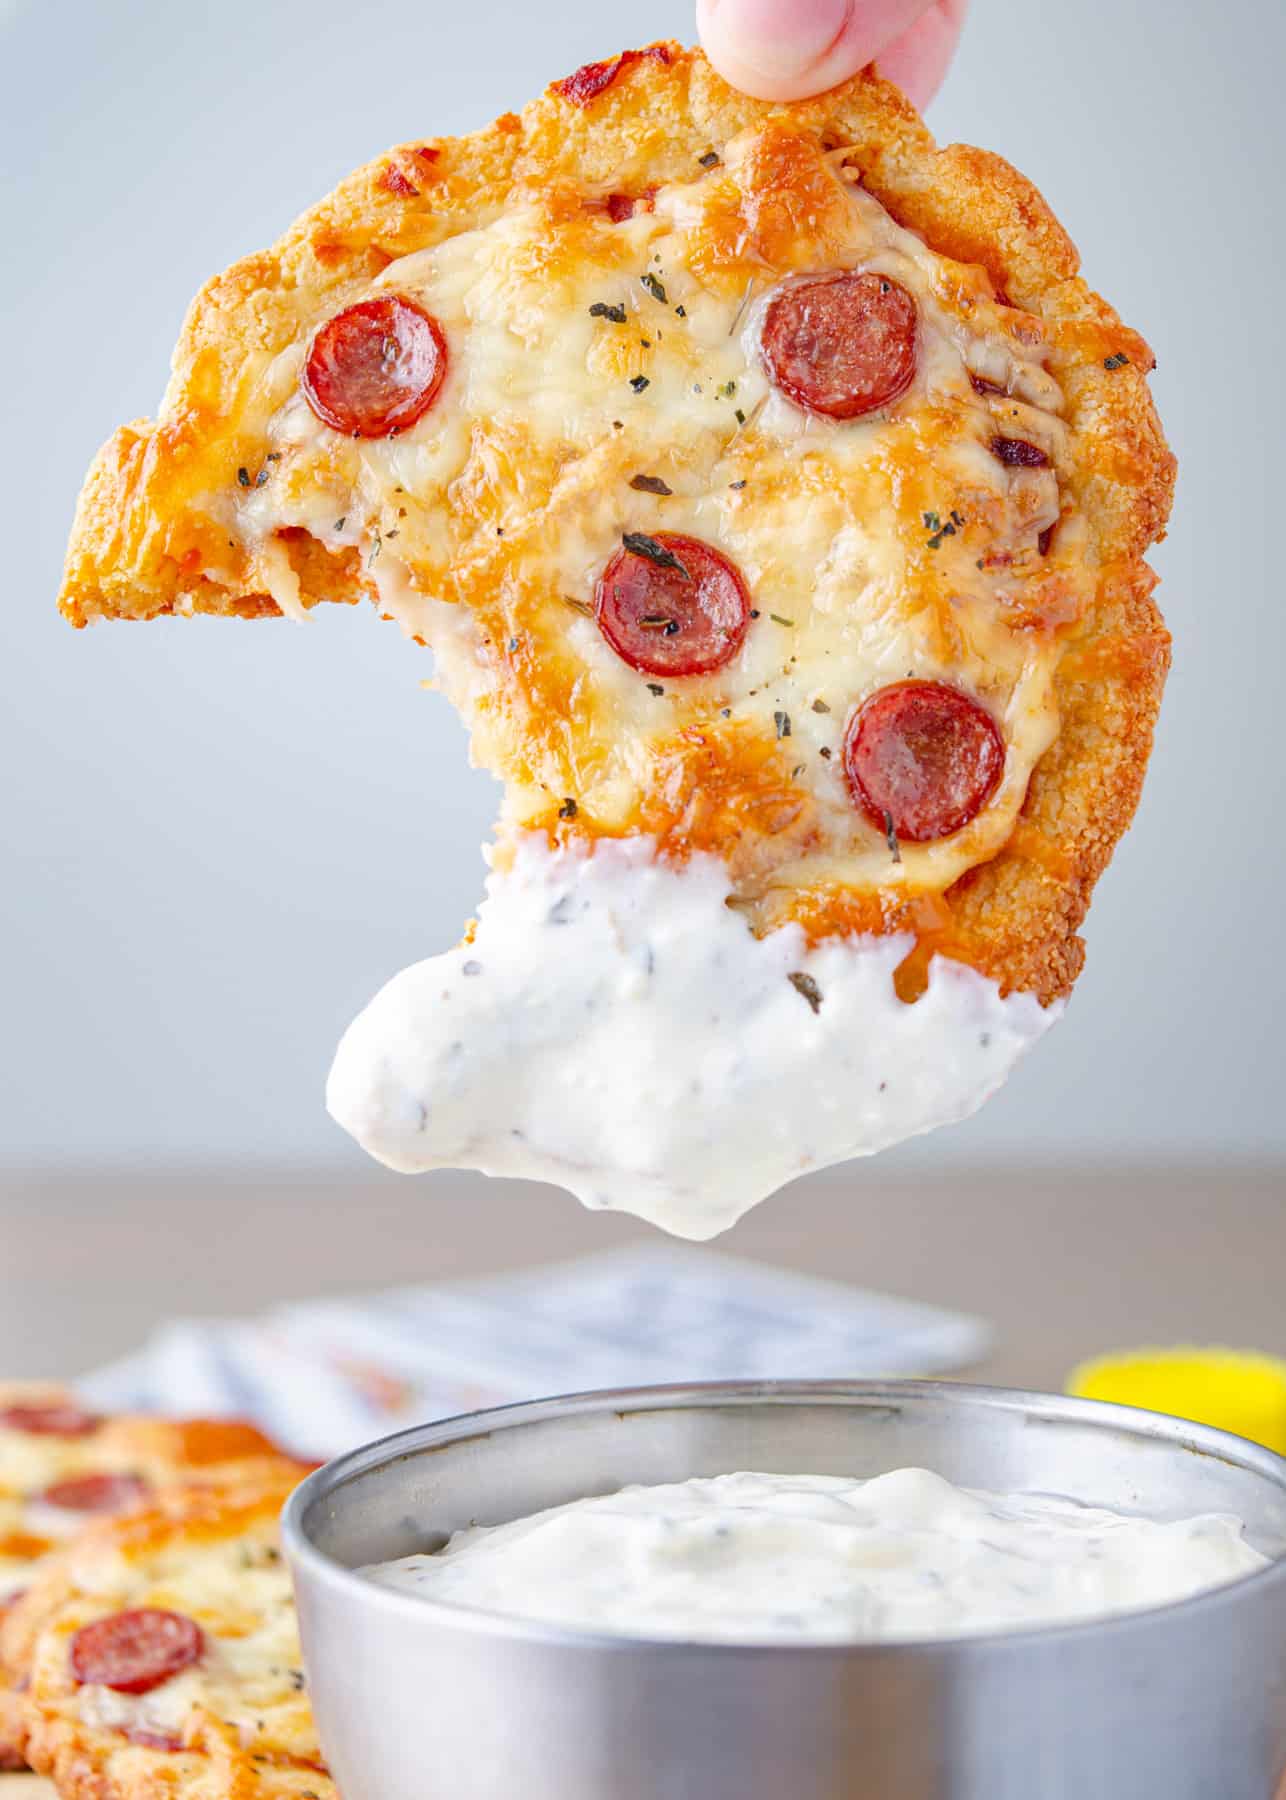 Low carb mini pizzas dipped in creamy garlic dipping sauce